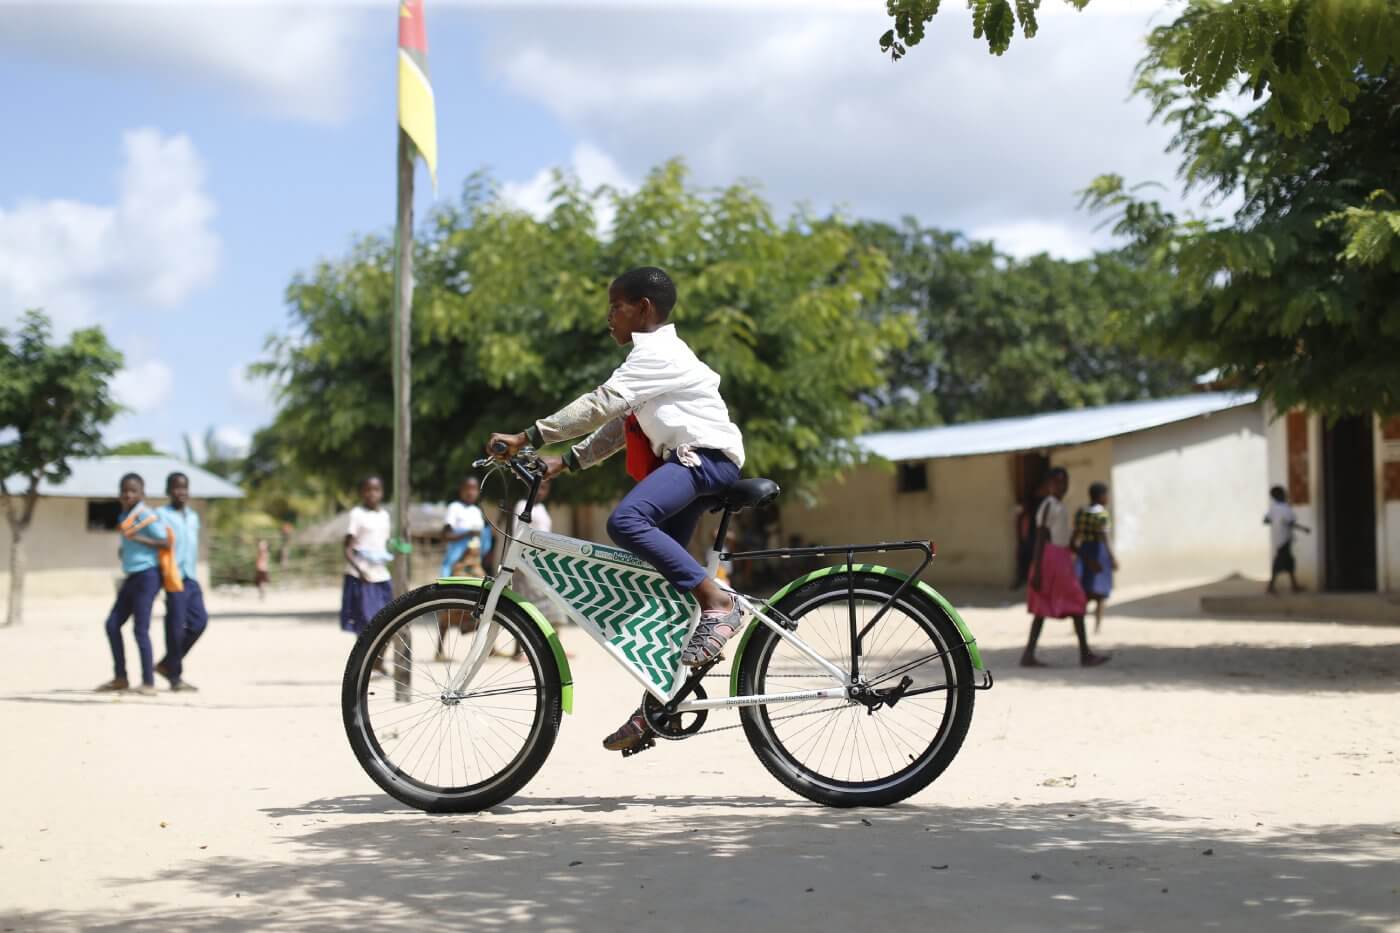 A young boy wearing a white shirt and blue pants patterned school uniform rides a white and green patterned Mozambikes bicycle in a rural school with trees, buildings, and a yellow and red flag in the background.